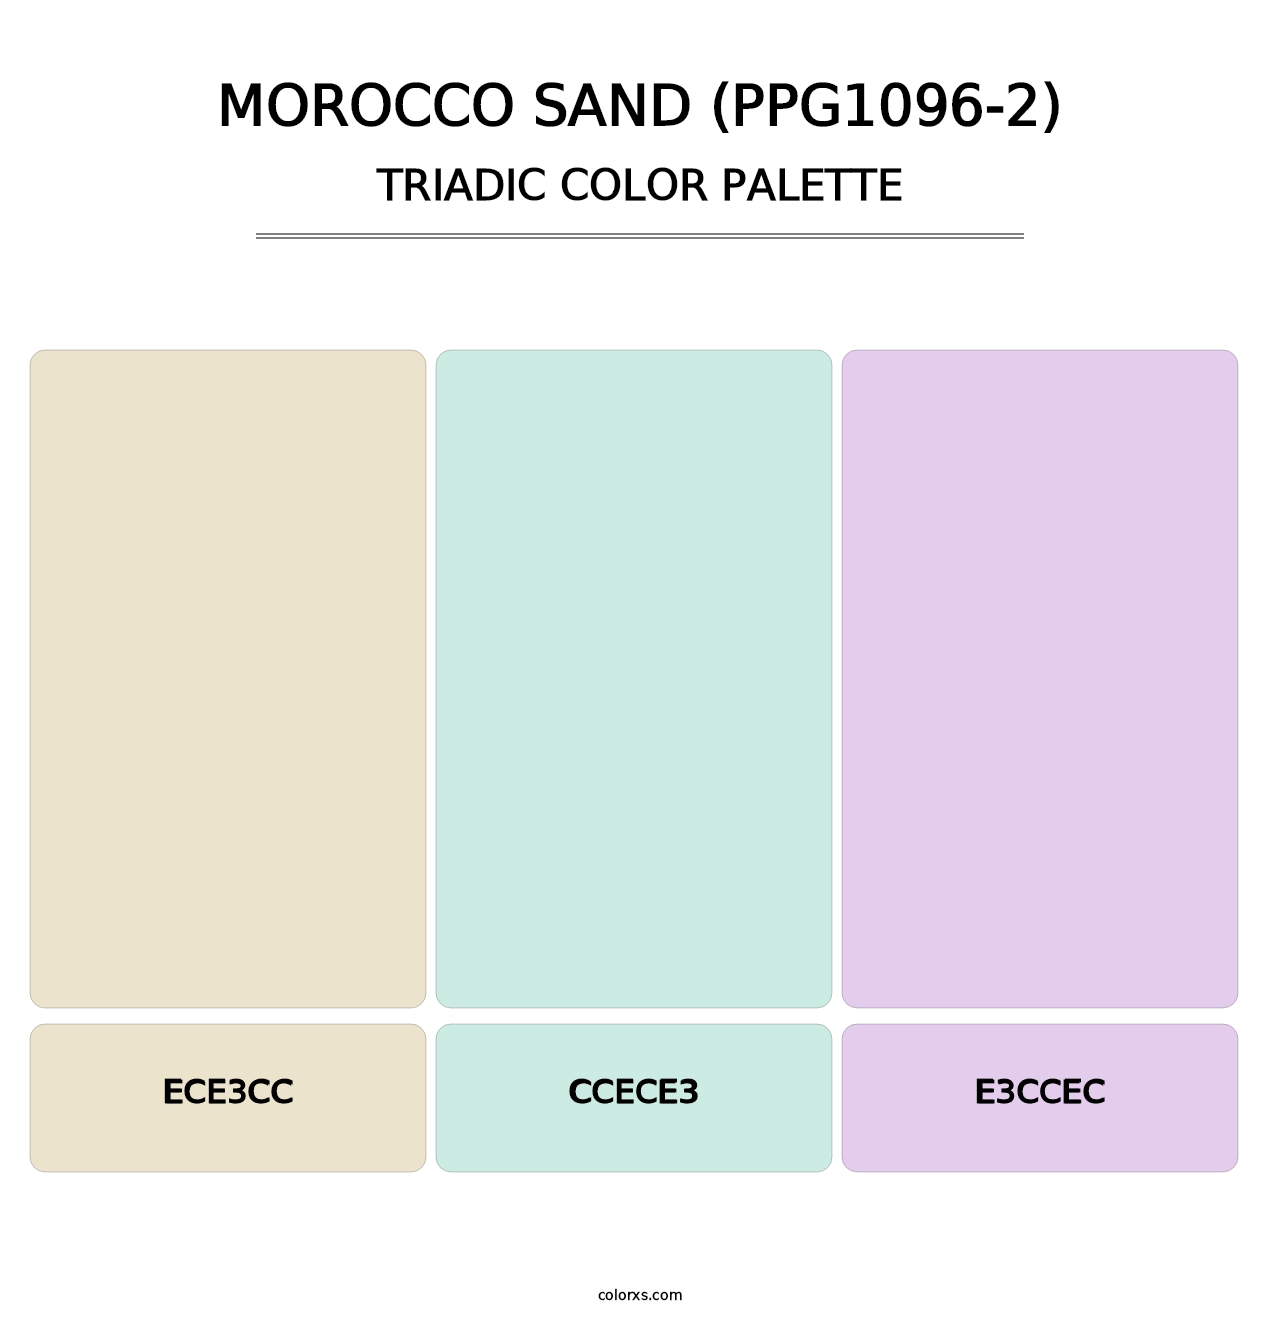 Morocco Sand (PPG1096-2) - Triadic Color Palette